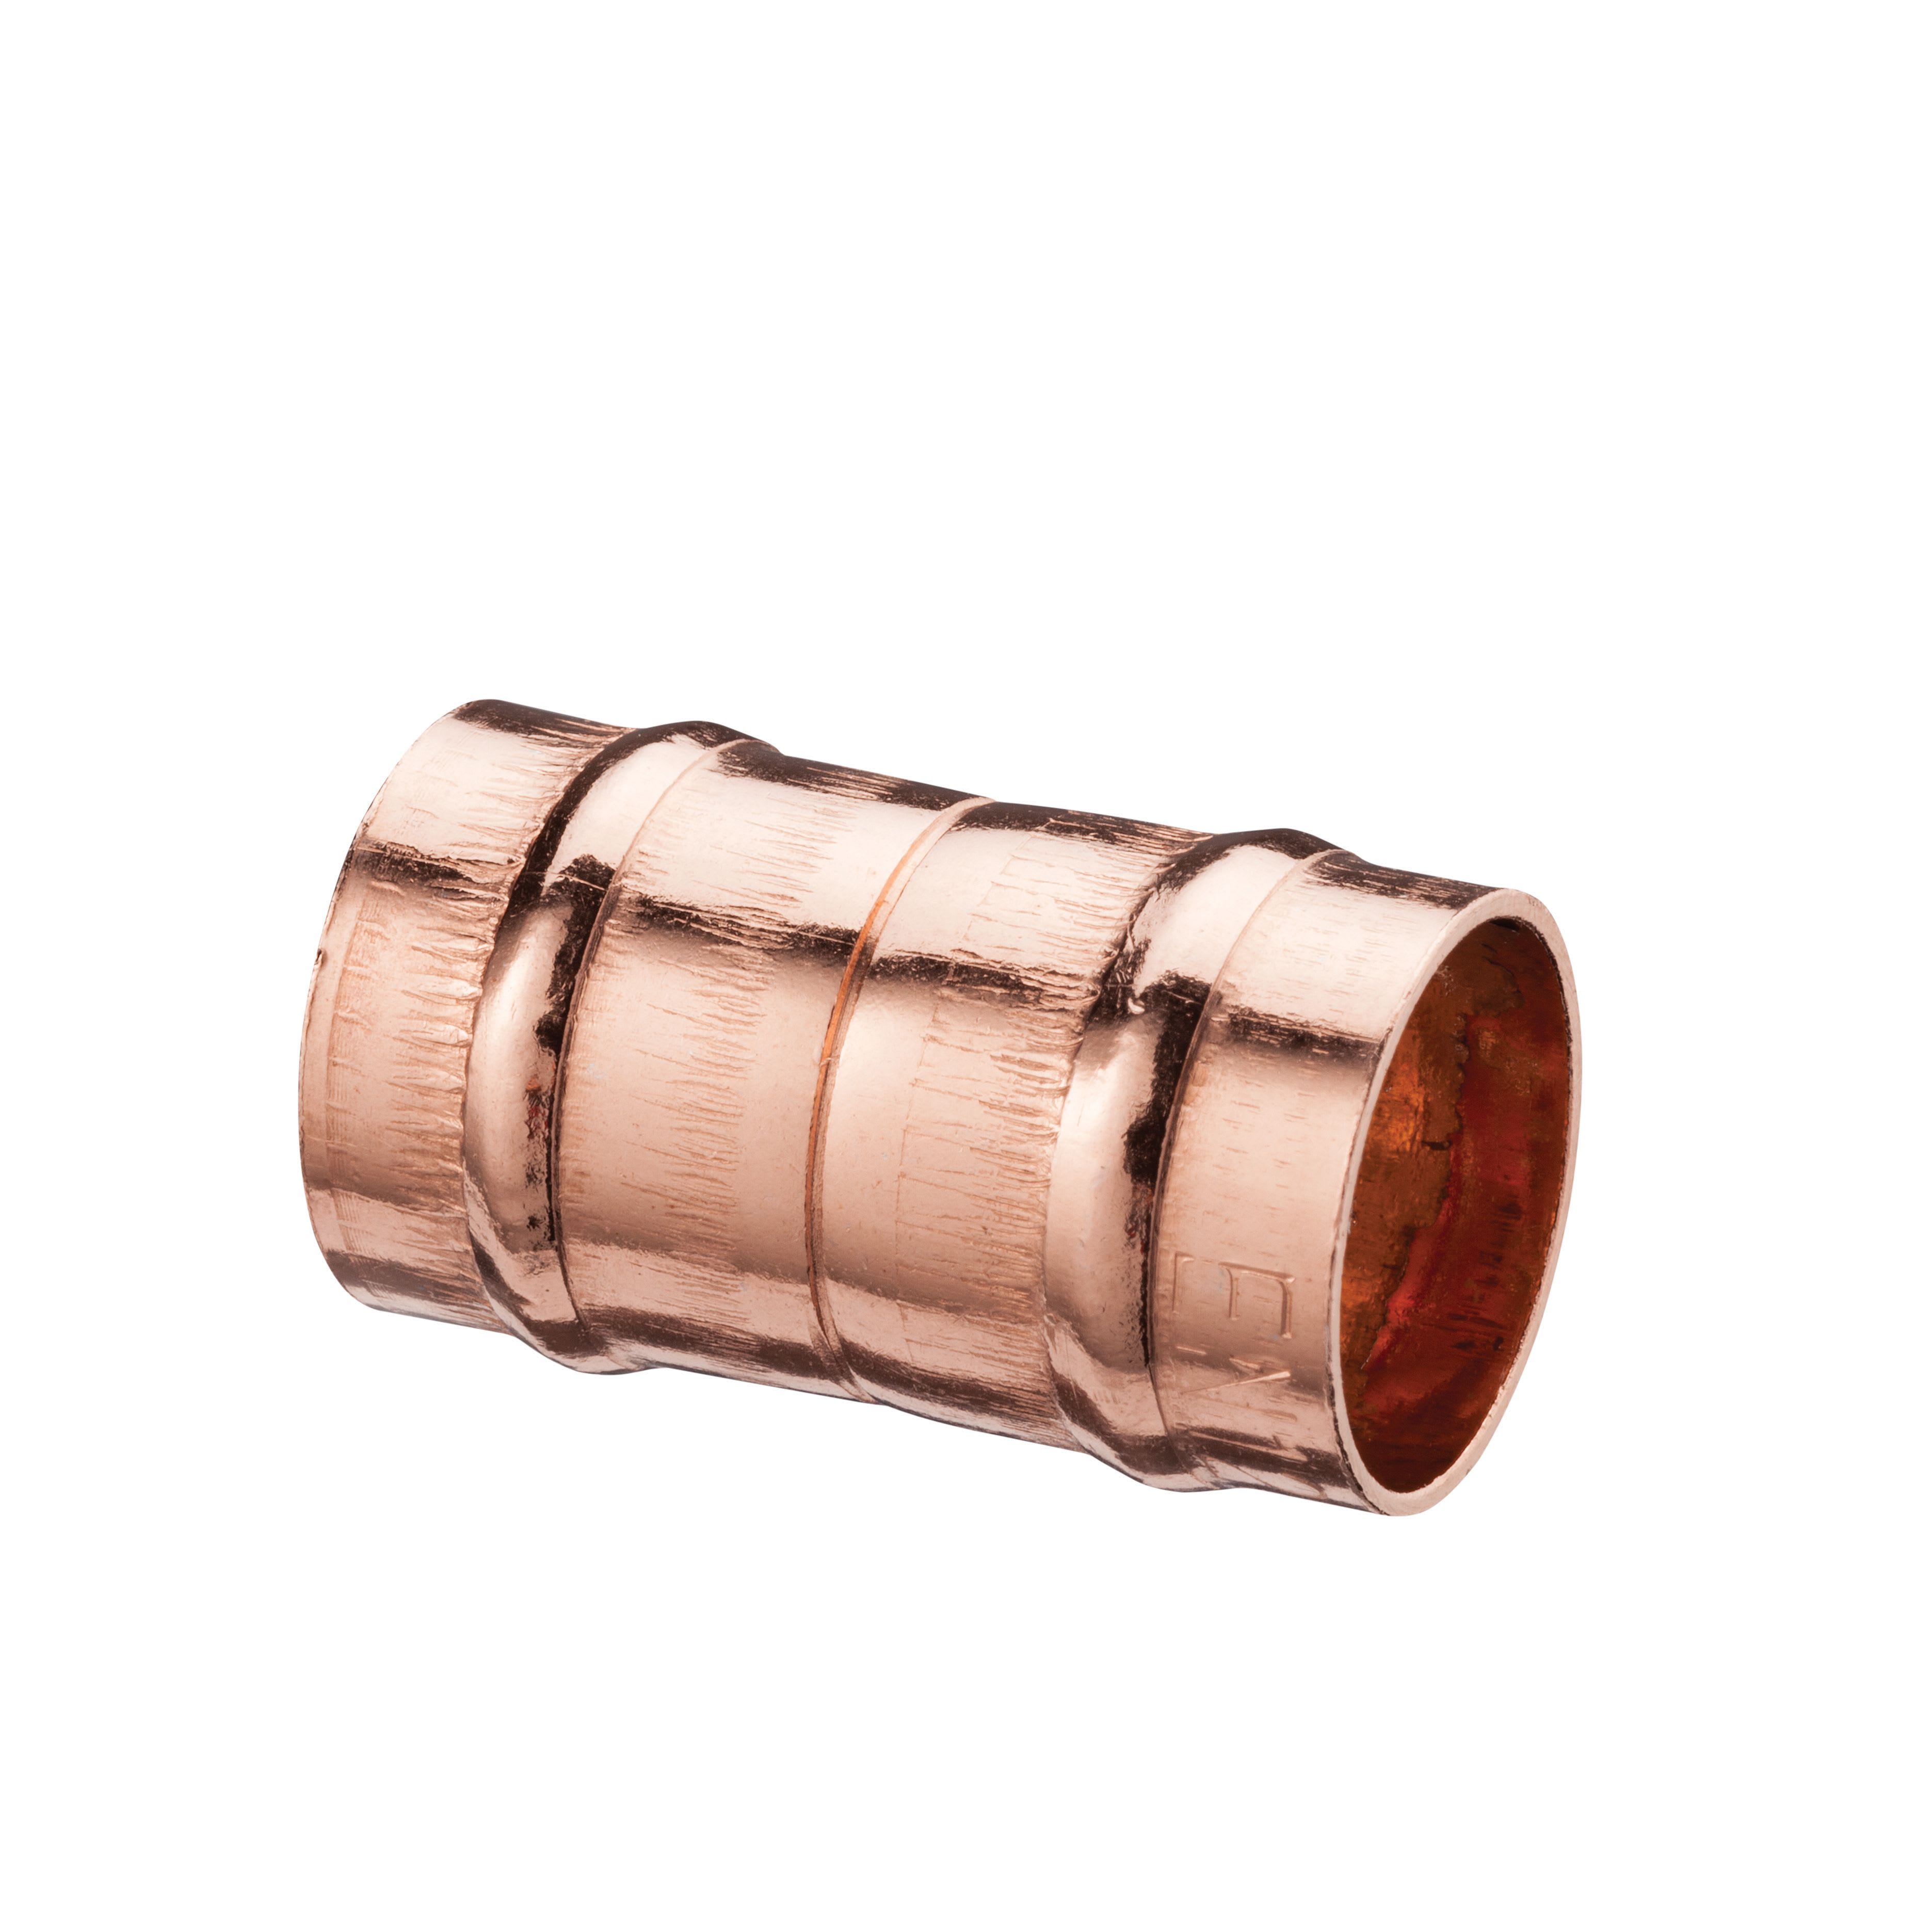 Primaflow Copper Solder Ring Straight Coupling - 10mm